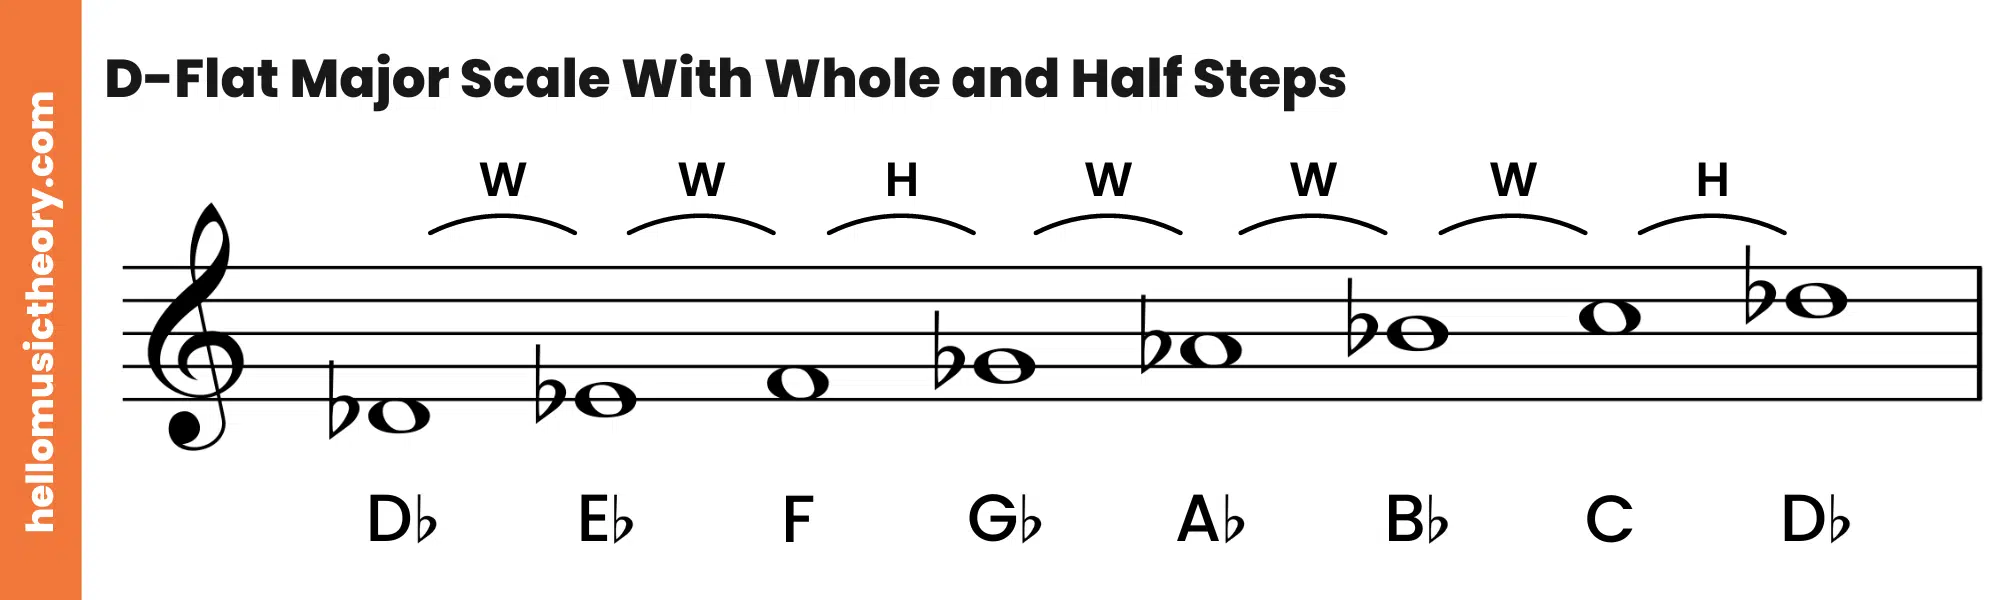 D-Flat Major Scale Treble Clef With Whole and Half Steps